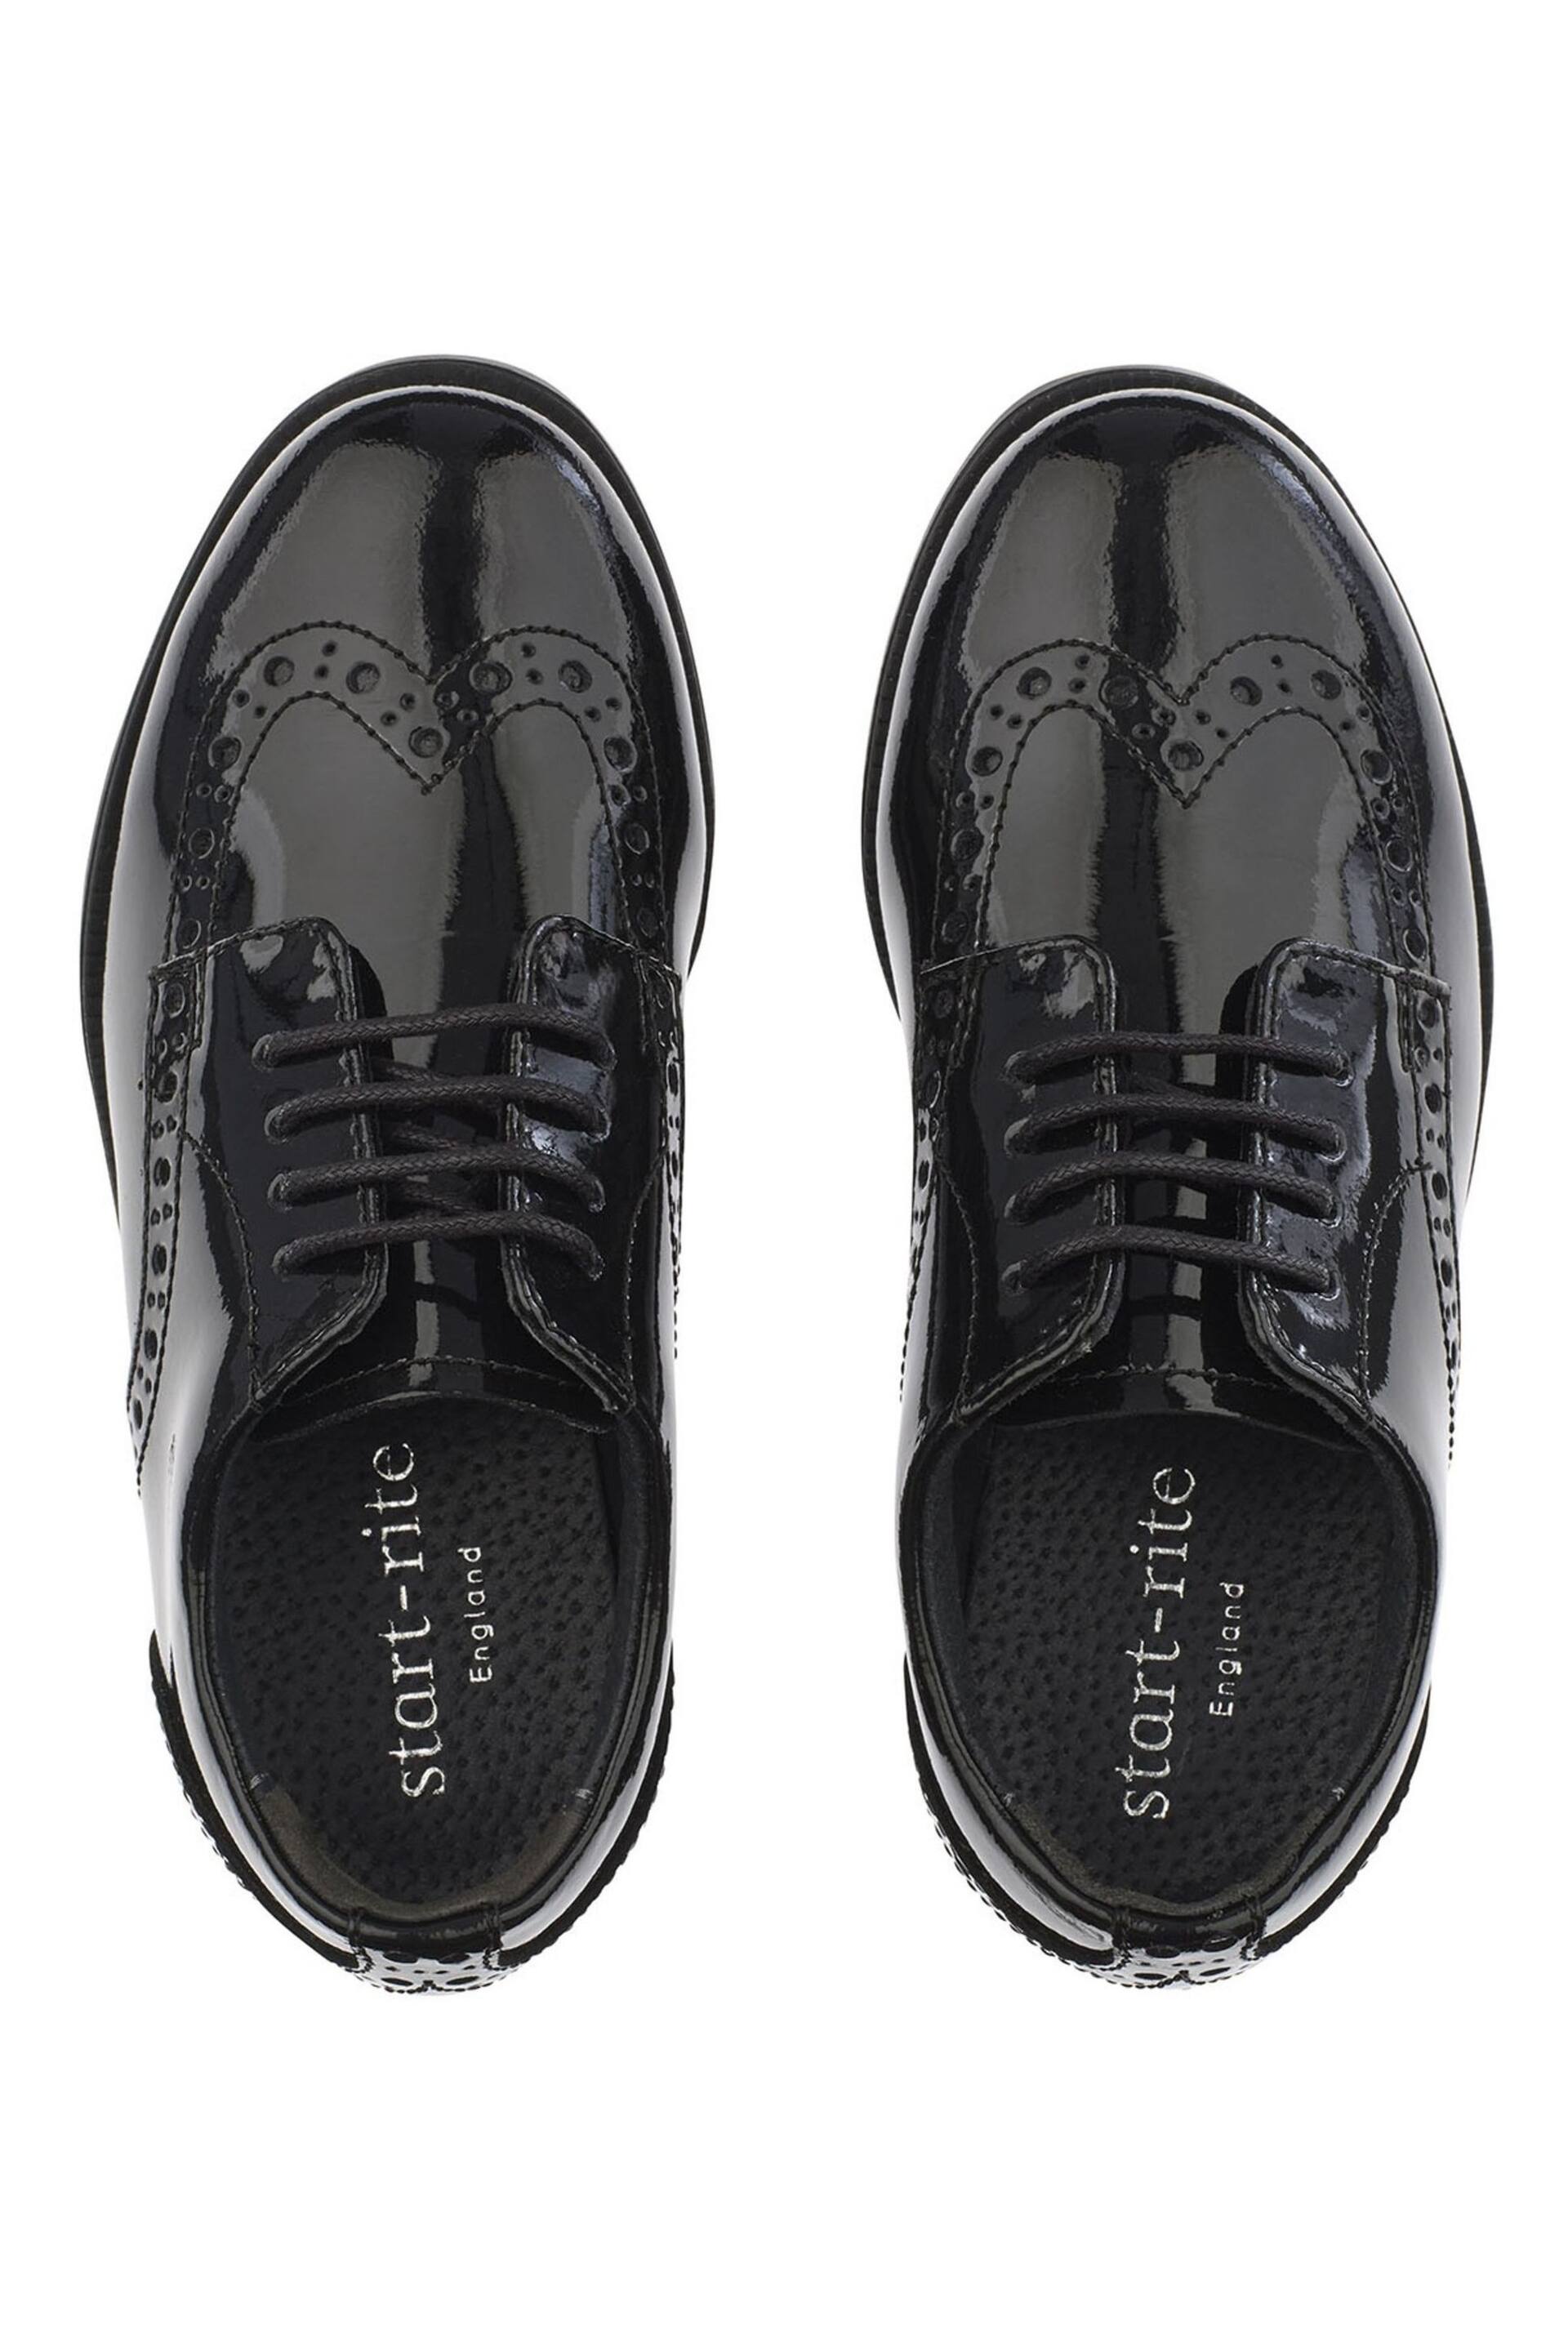 Start-Rite Brogue Snr Black Patent Leather School Shoes Wide Fit - Image 5 of 6